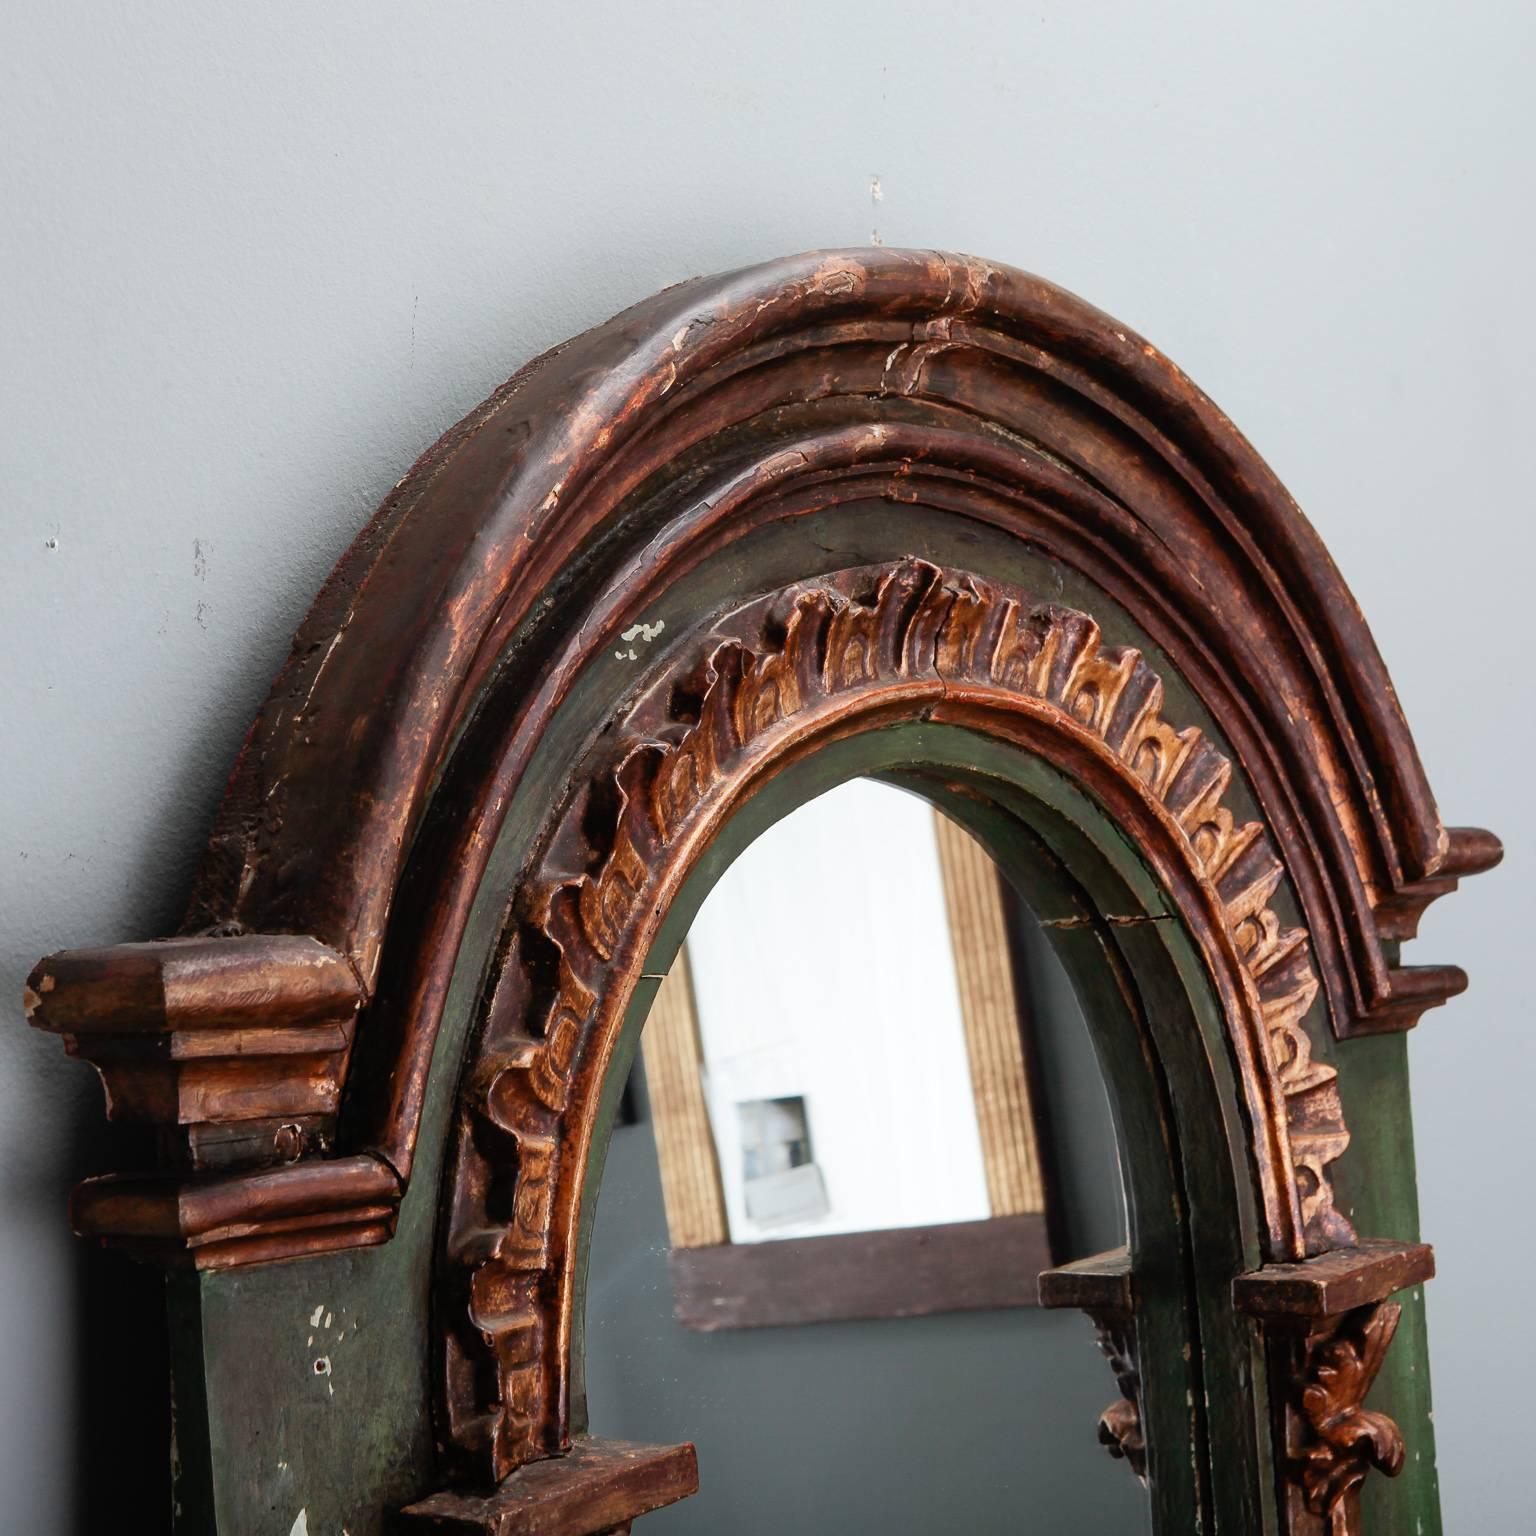 French arched mirror has an elaborate green painted and carved frame with extensive gilded detail, circa 1880s.  Actual Mirror Size:  35.5” h x 18” w
 